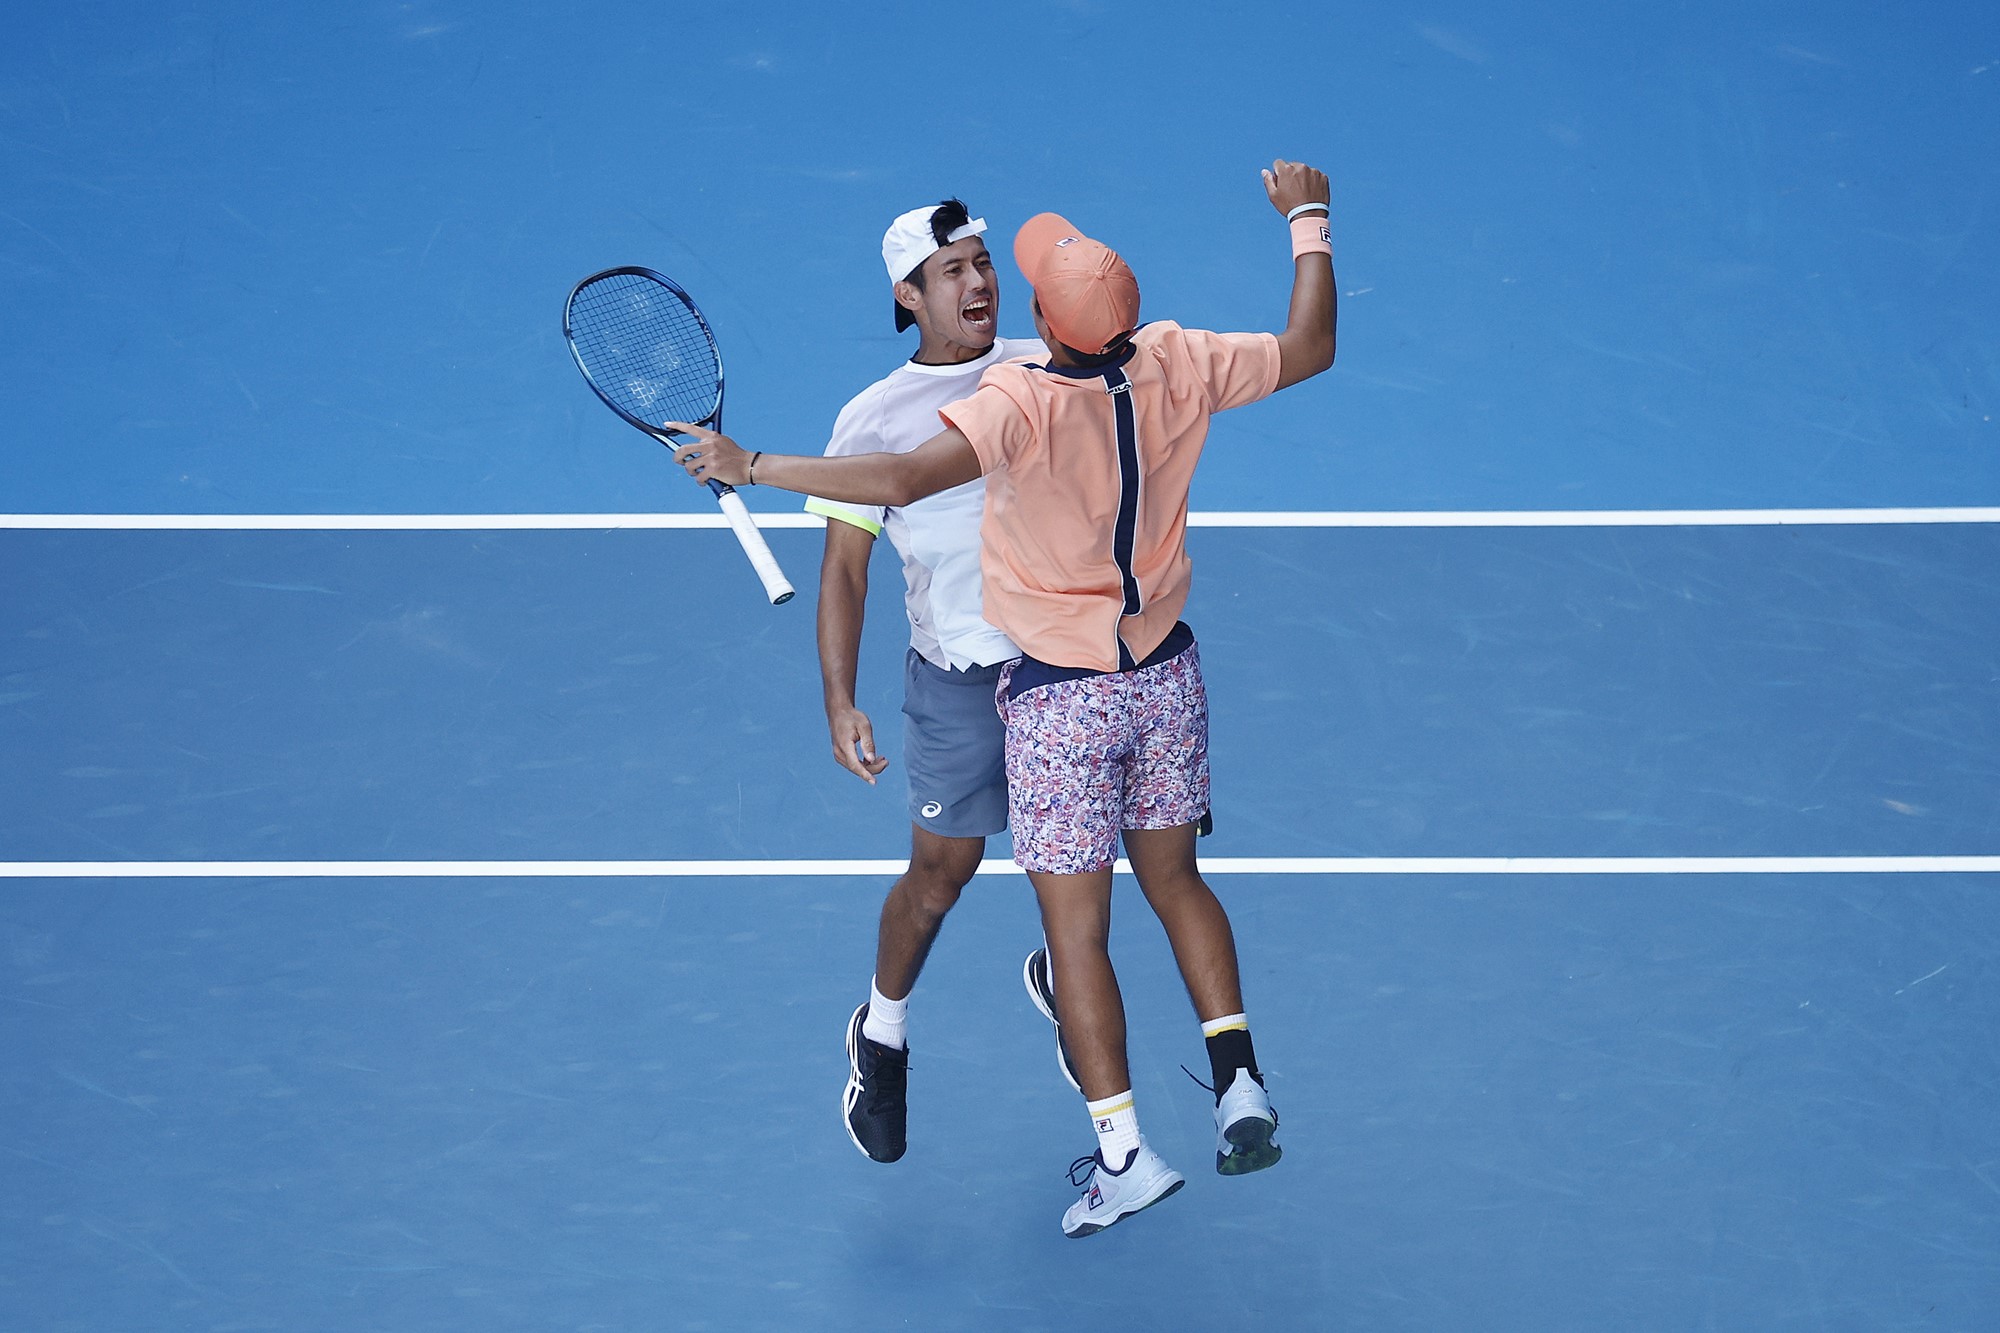 Two tennis players chest bump.